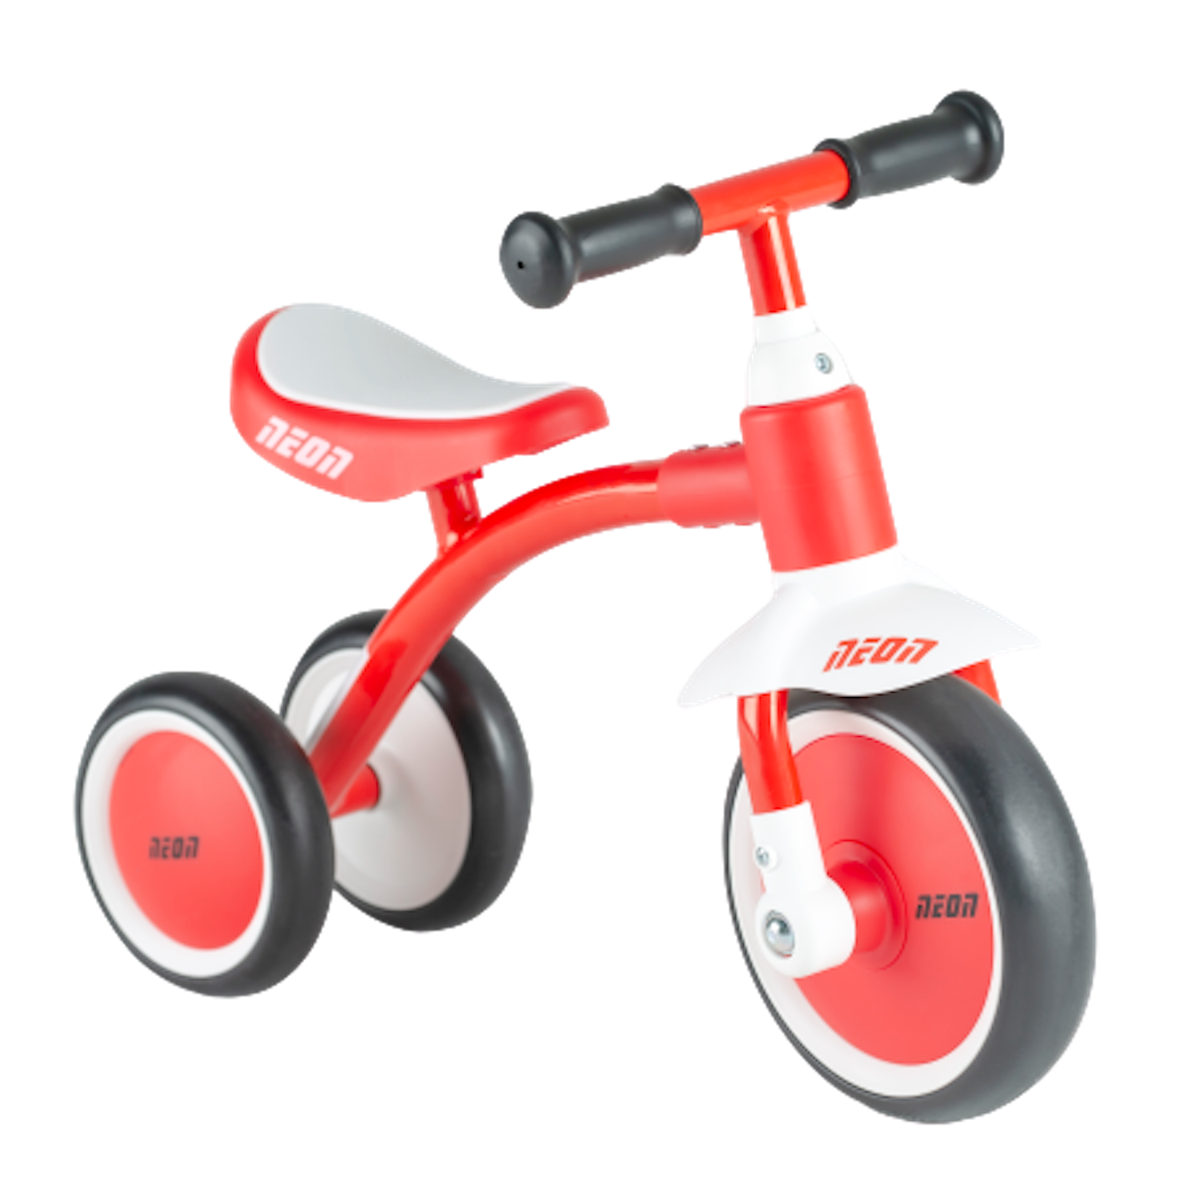 Neon Trike Mini-Walker Ride On - Red | Baby's First Balance Bike for Boys and Girls Age 10 Months to 2 Years